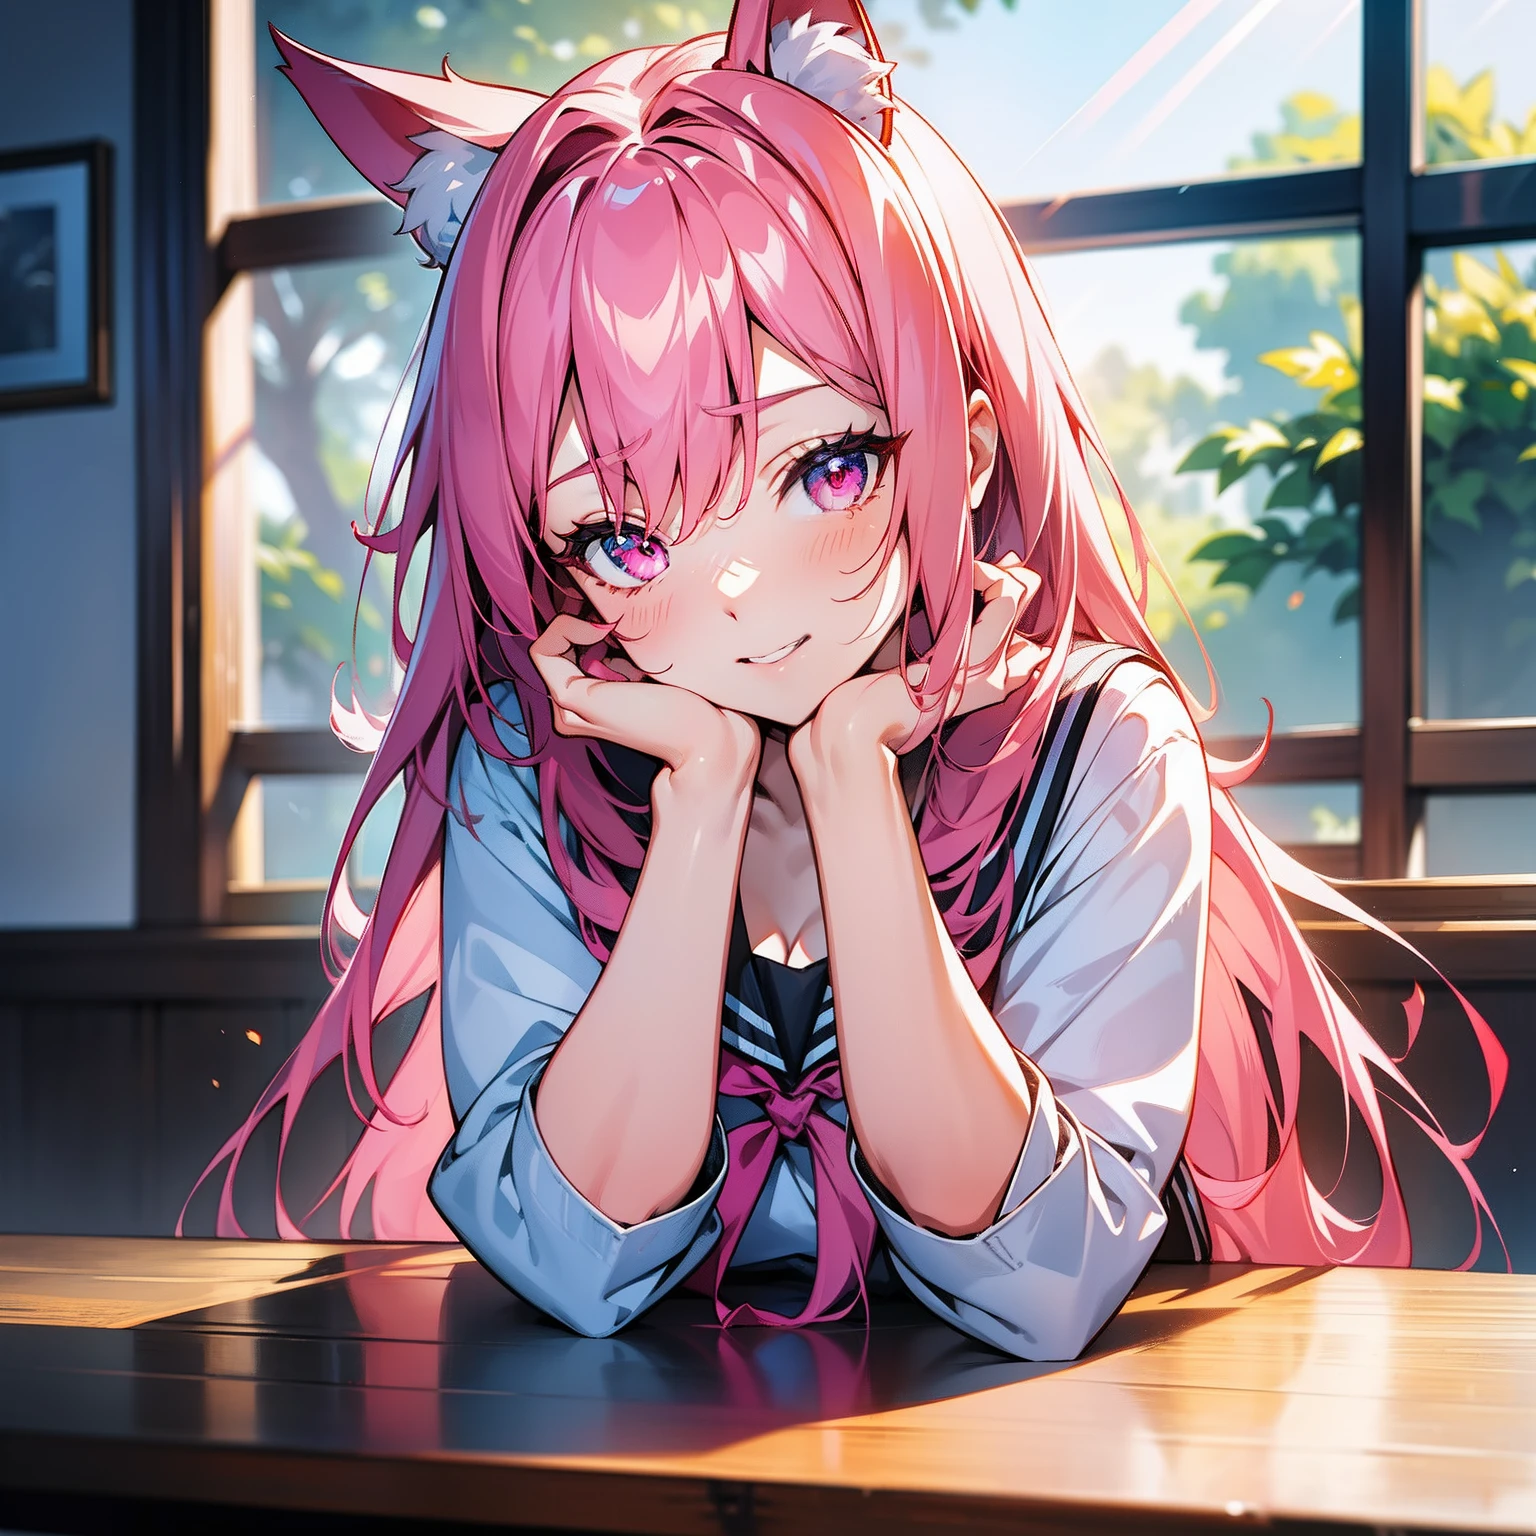 long pink hair, fox pink ears,pink eyes,There is a strong feeling of freshness and freshness,Girl with,((serafuku)), hands on the face, Leaning over the table, Resting your elbows on the table, classroom, sunlight rays, Window, See the beholder, Toothy smile, I see the cleavage:1.2, Best Quality,Ultra-detailed, High Resolution, extremely detailed CG, Unity 8k Wallpaper, official arts, Production art, novel illustration, by famous artist, caustics, textile shading, super detailed skin, perfect anatomy, Detailed, Cinematic lighting, dinamic lighting, beautiful detail eyes, (topquality), (Ultra-detail), (Piece masuter), (hight resolution), (Original), Character design, game cg, detailed manga illustration, Realistic head-to-body ratio:1.2